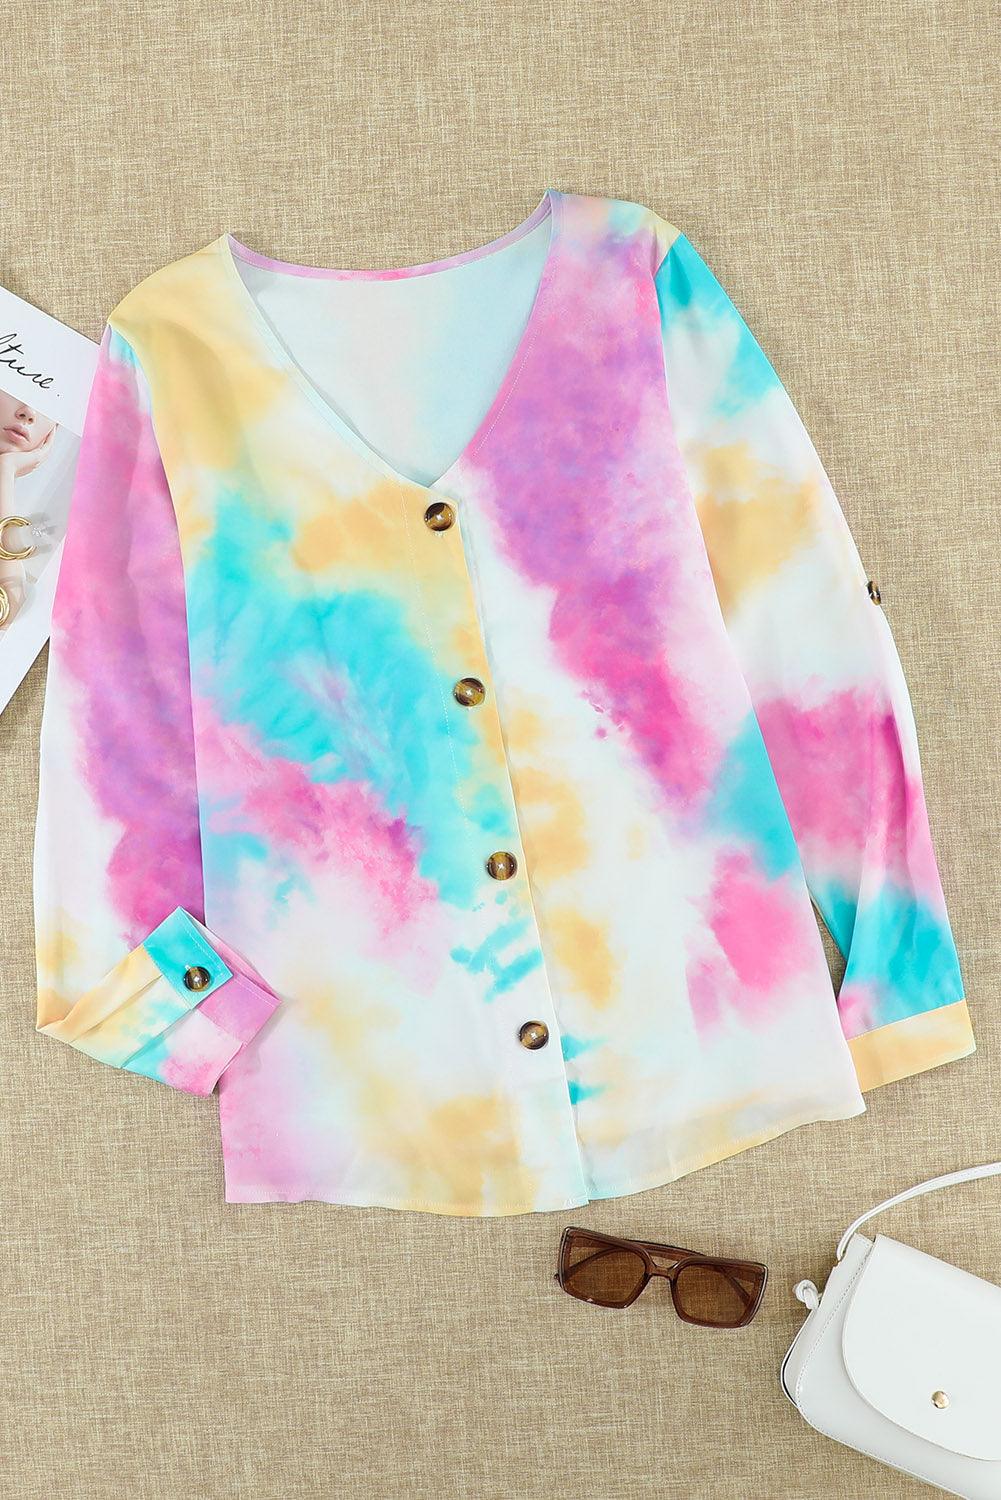 V-neck Long Sleeve Tie-dye Blouse With Buttons Closure - L & M Kee, LLC